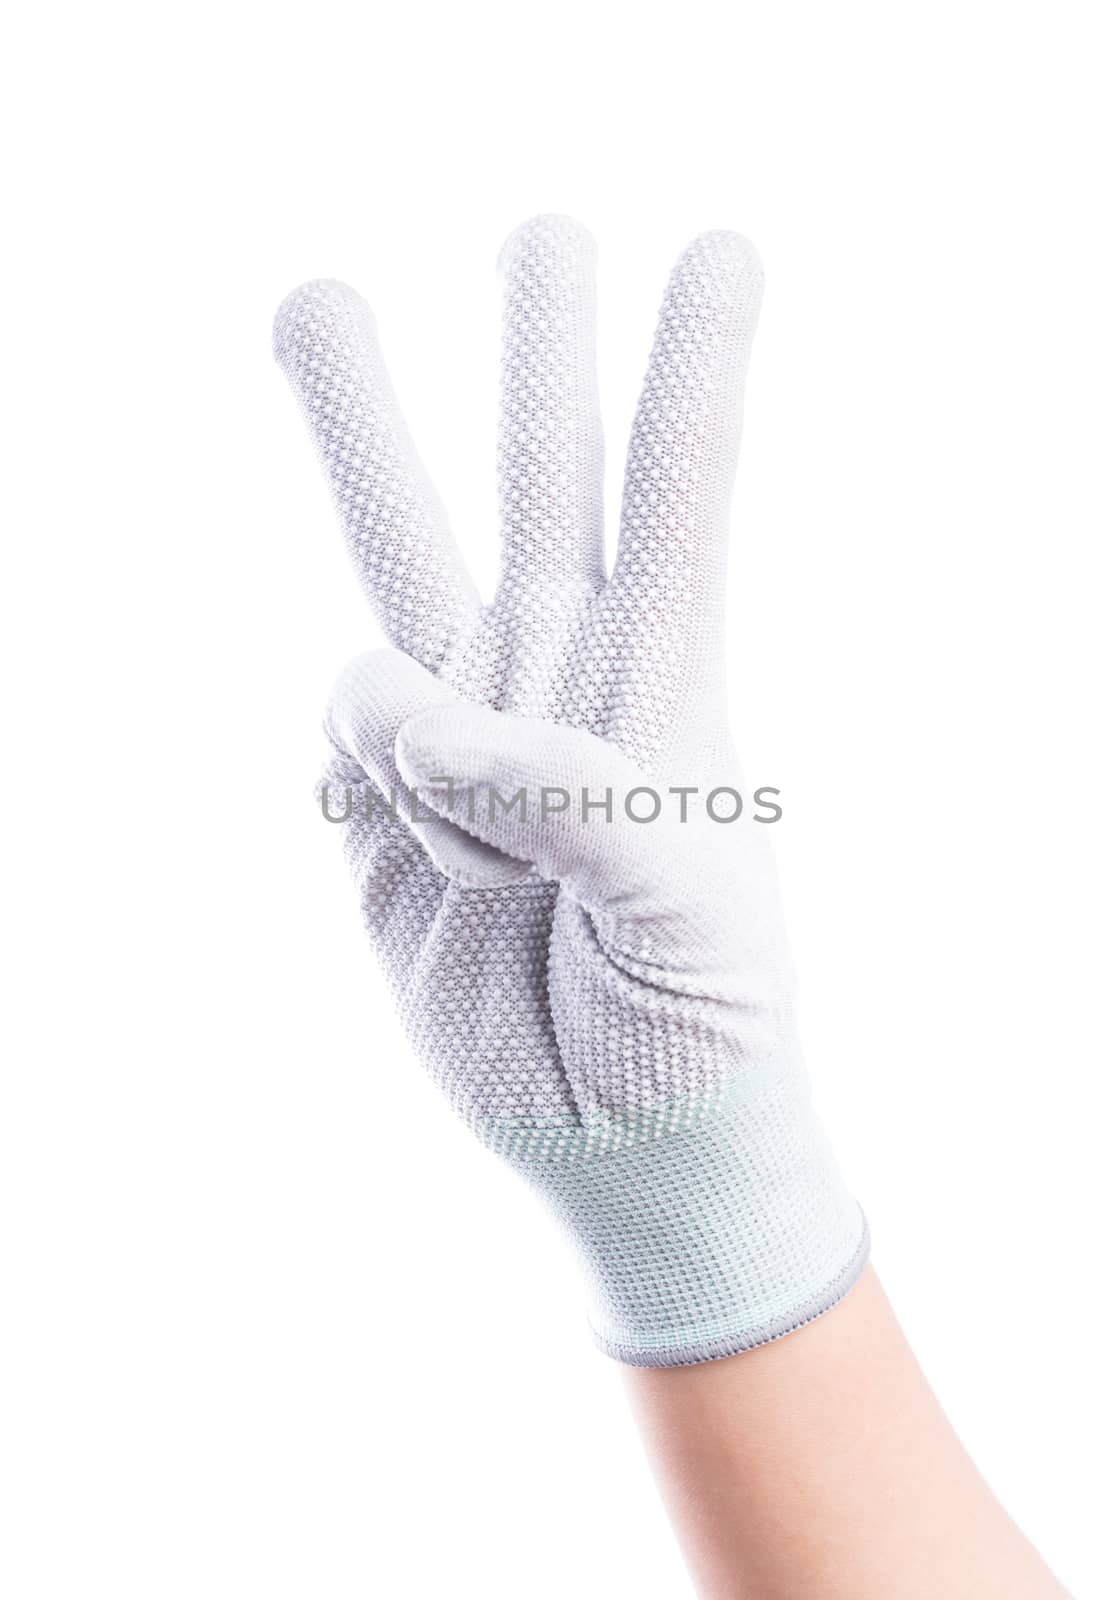 Show Hands three finger with cotton gloves isolate on white background